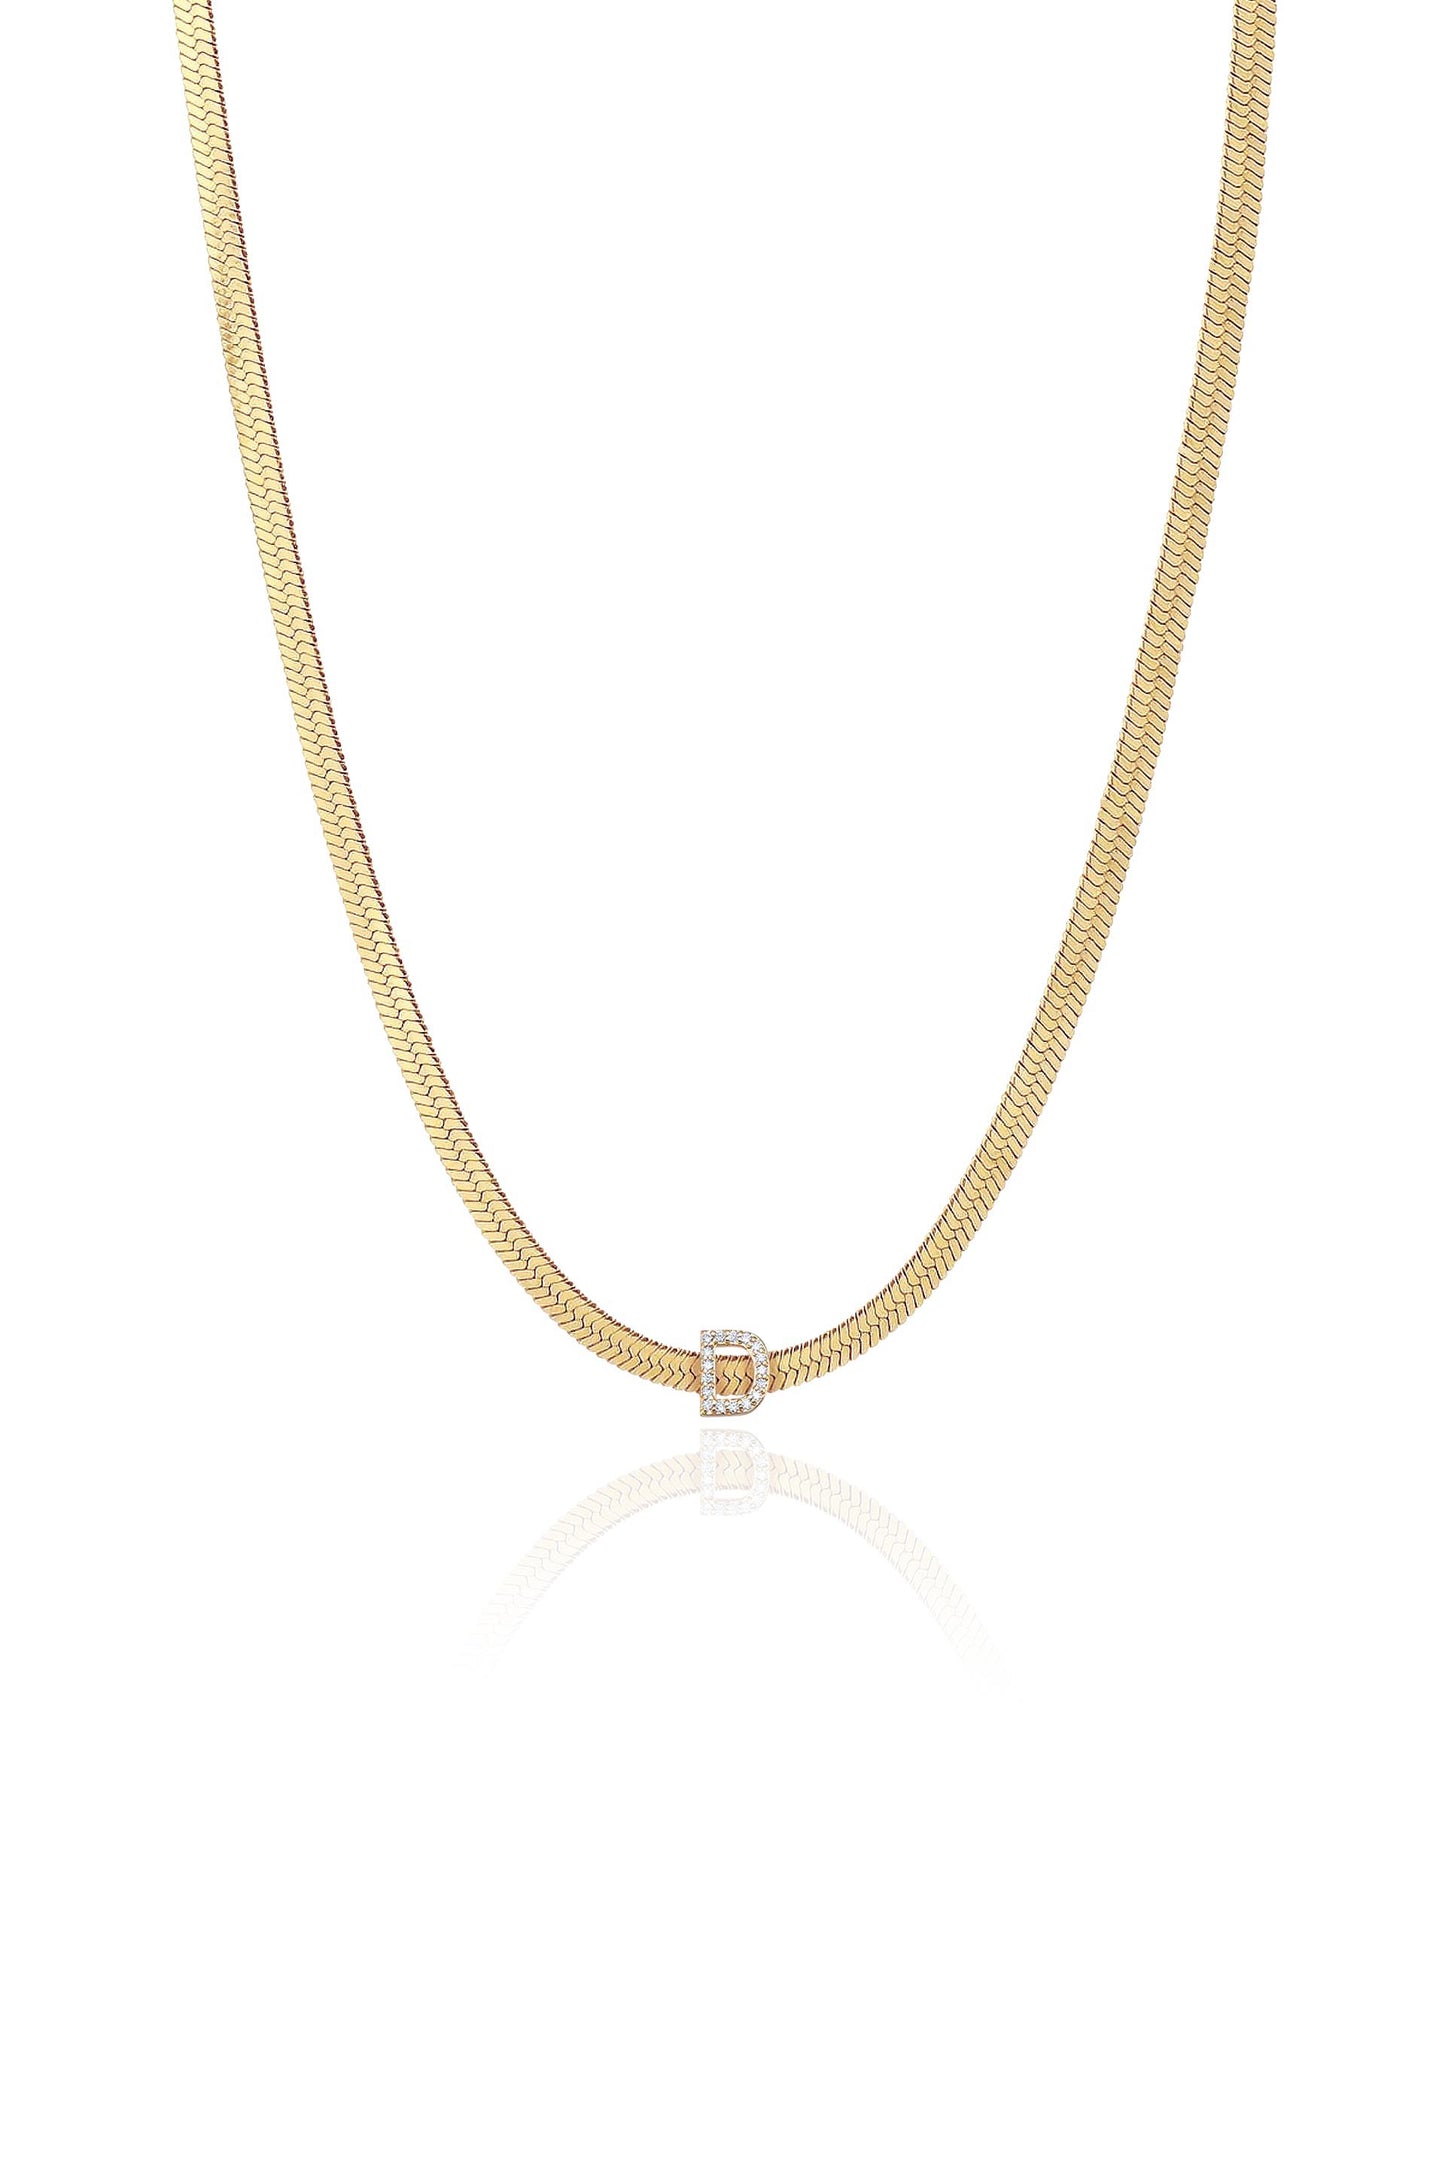 Initial Herringbone 18k Gold Plated Necklace - D